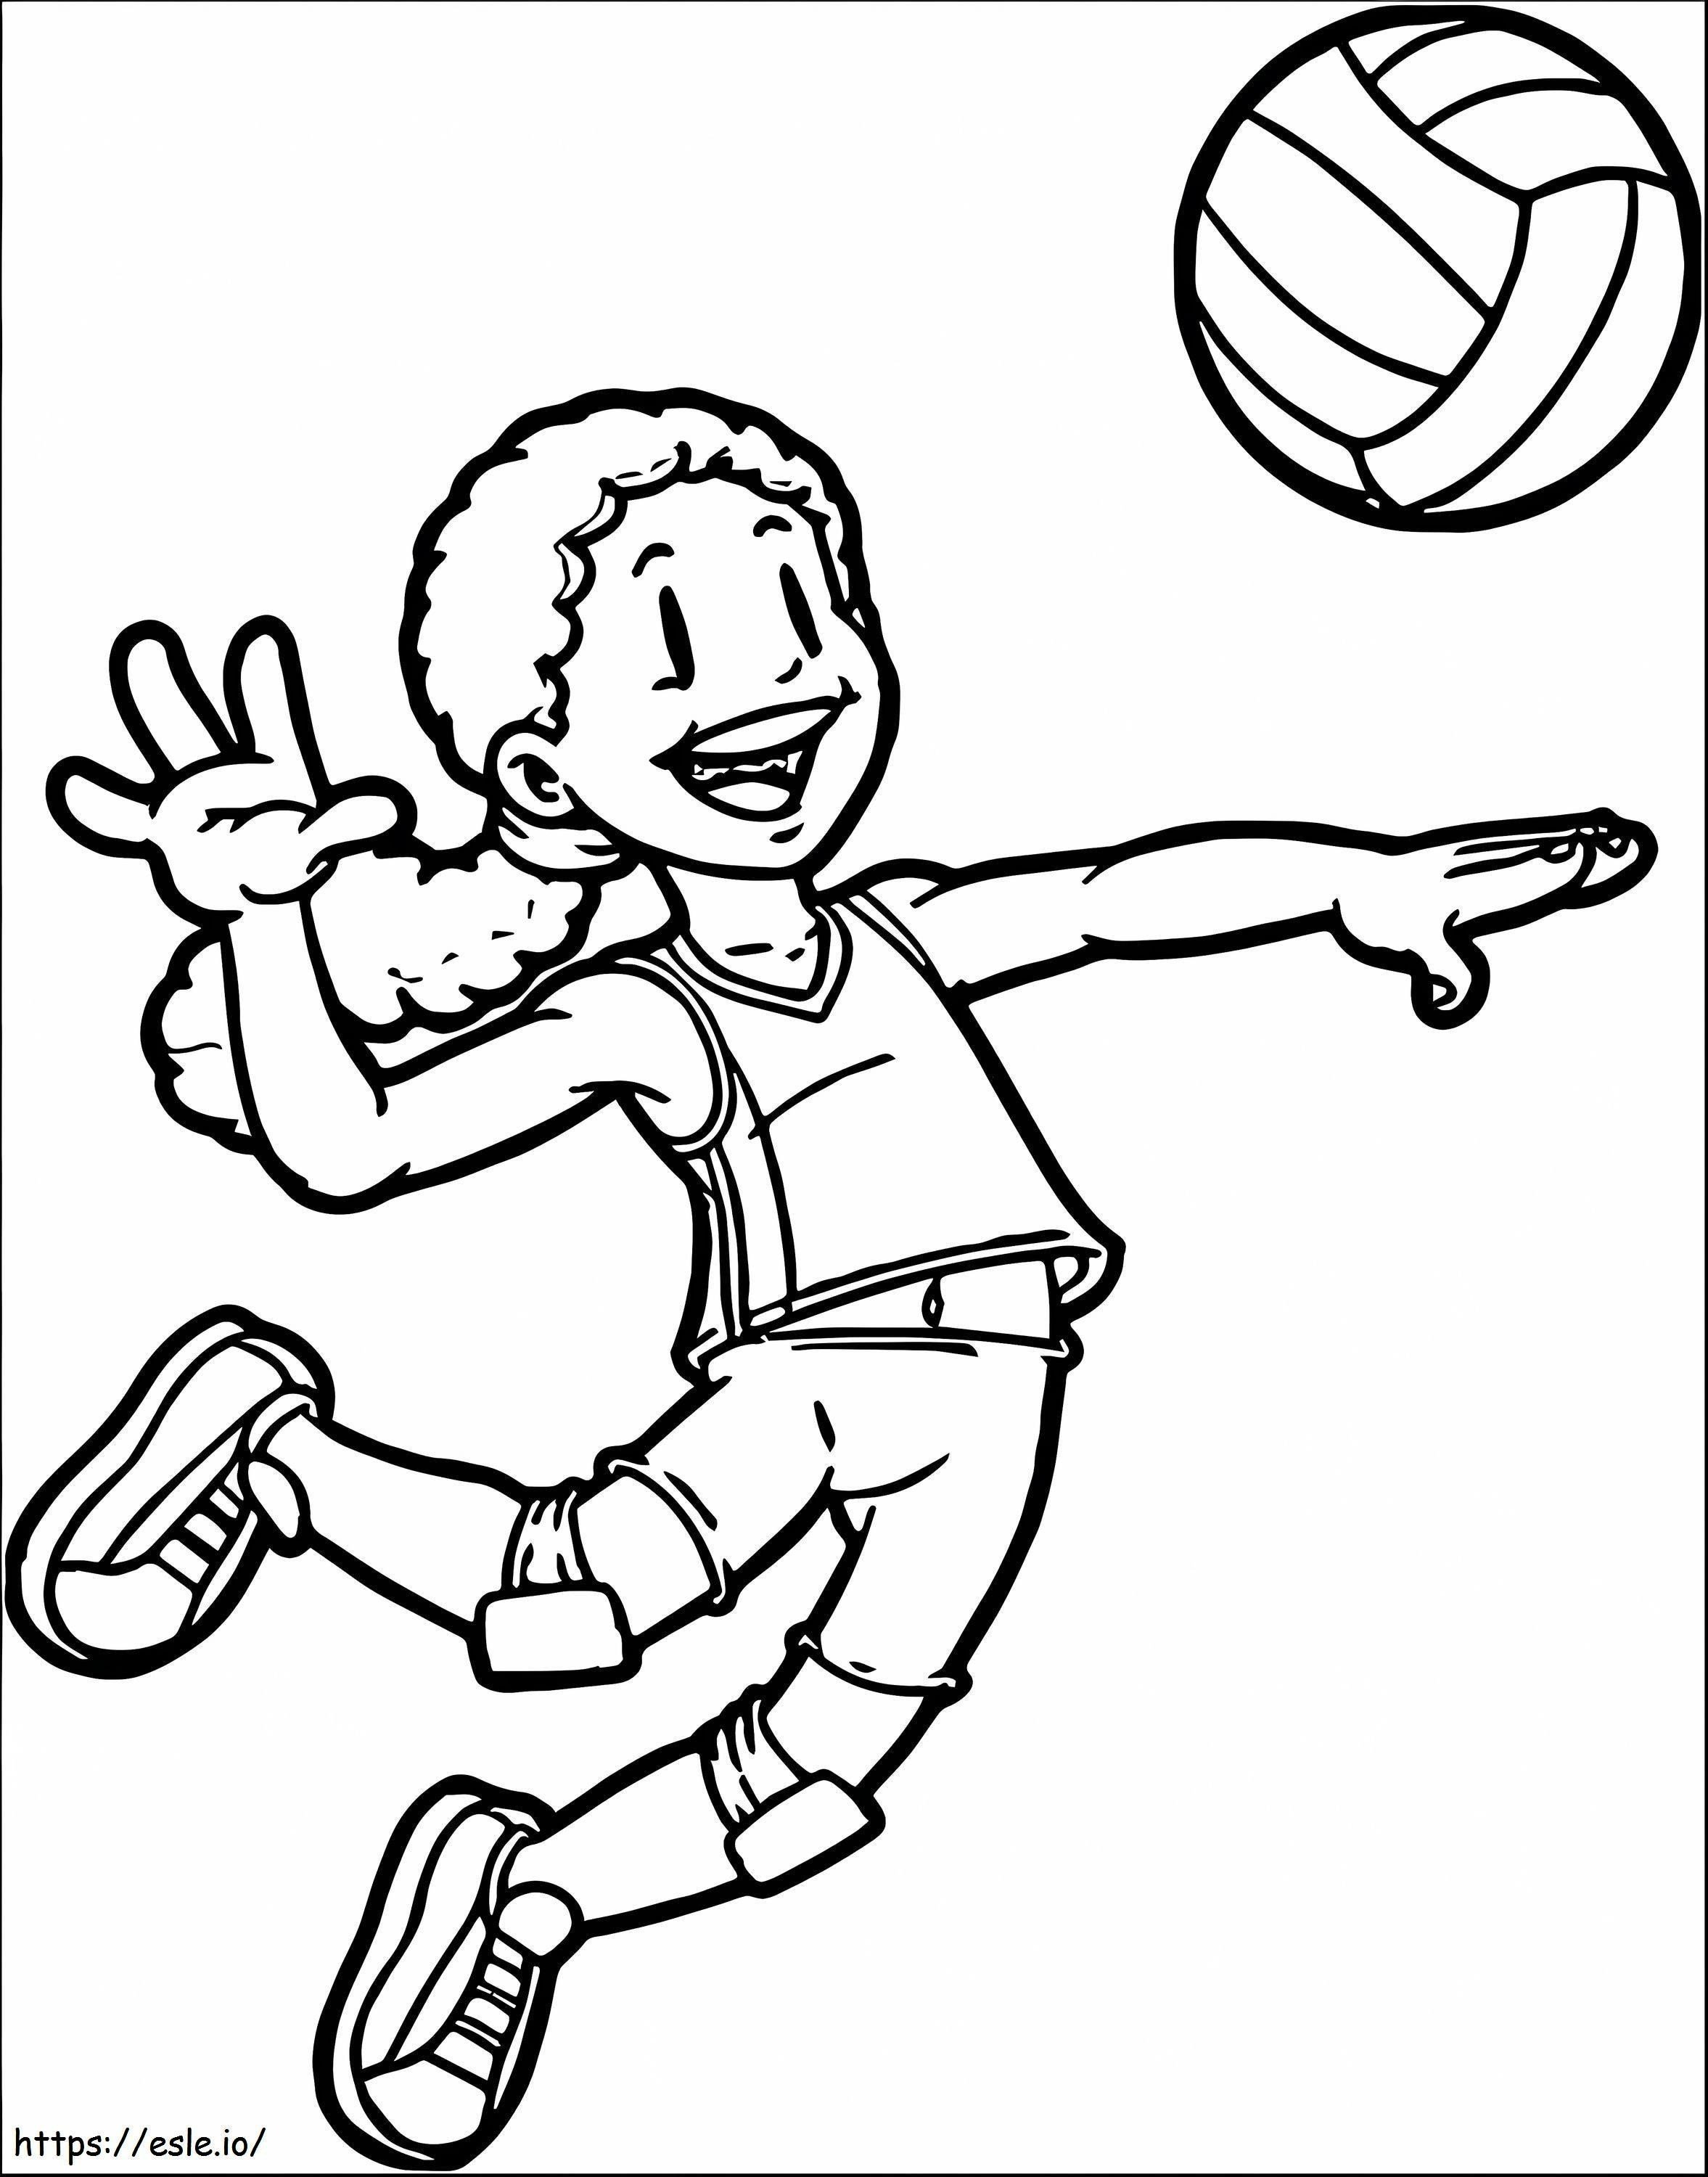 1556940949 Eimay5Alt coloring page